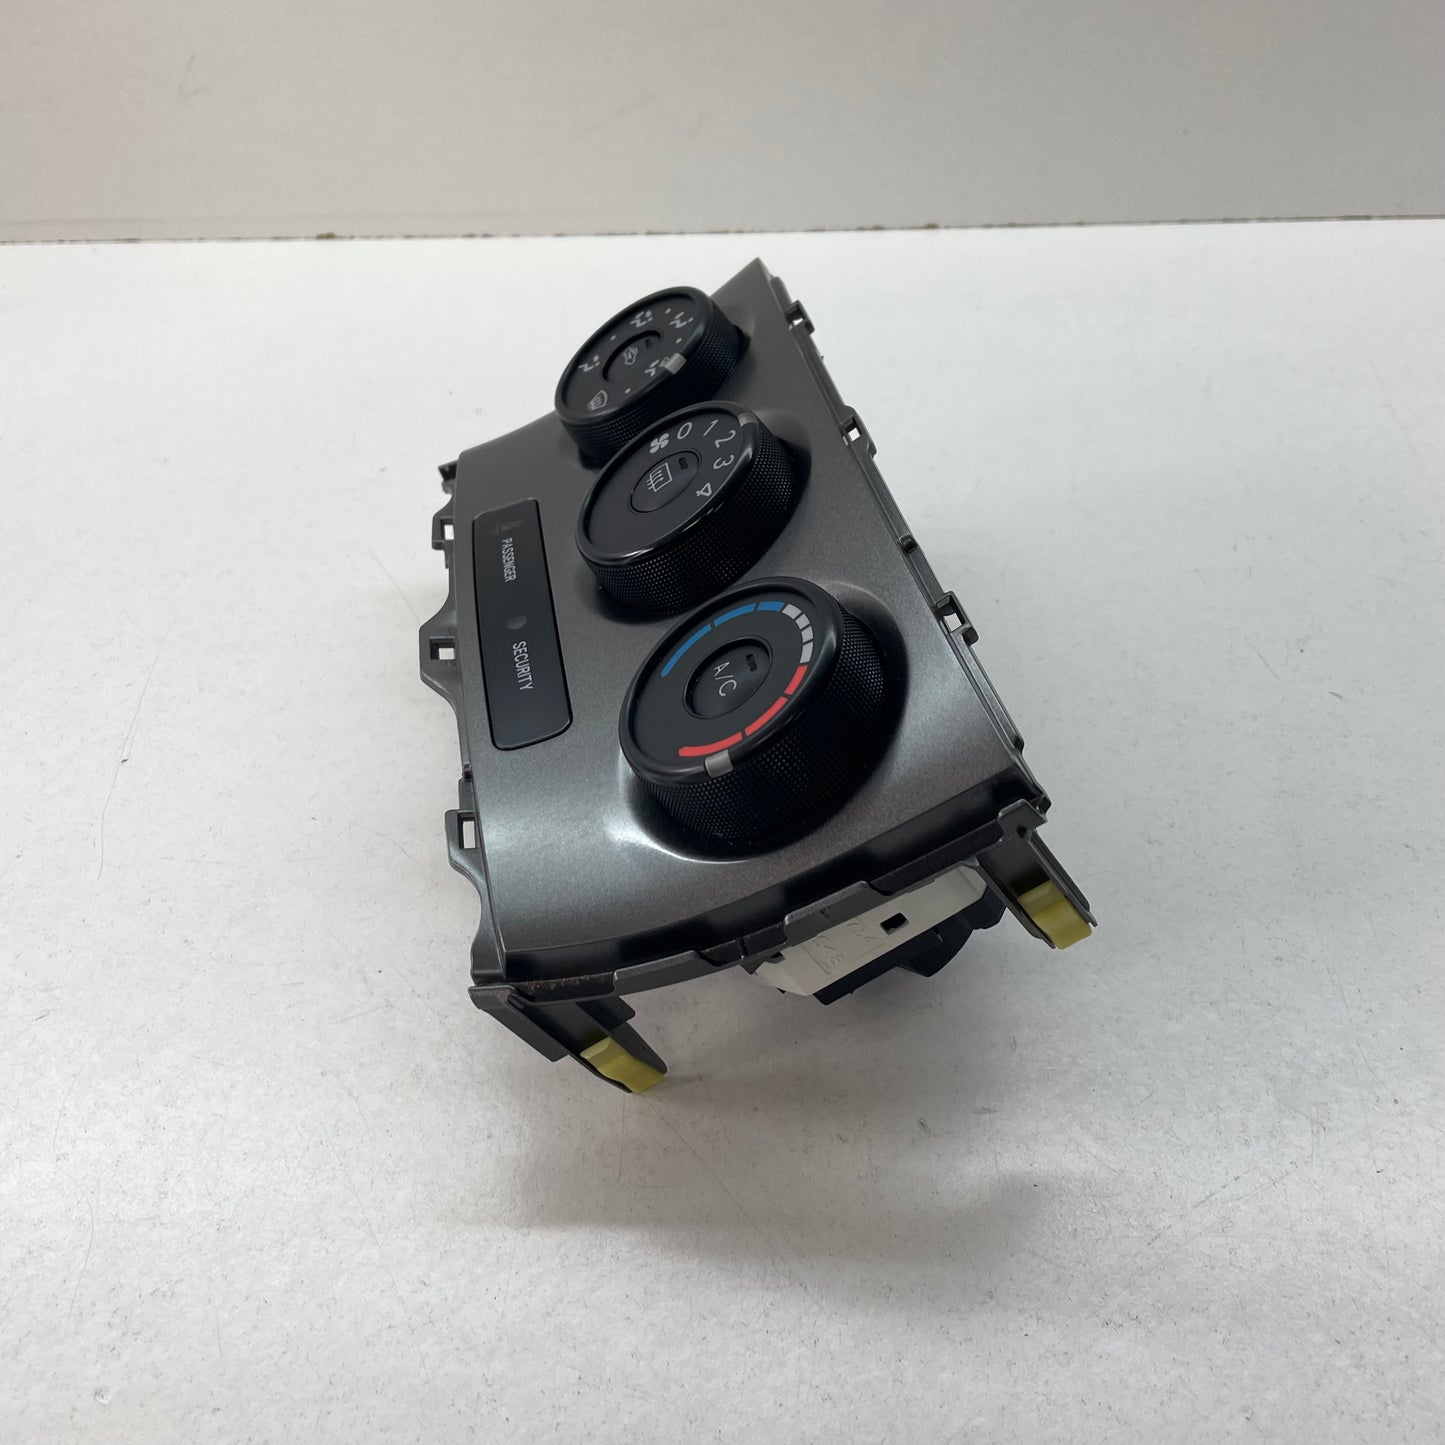 Toyota Corolla Hatchback Air Conditioning Controls ZRE152R 2007 2008 2009